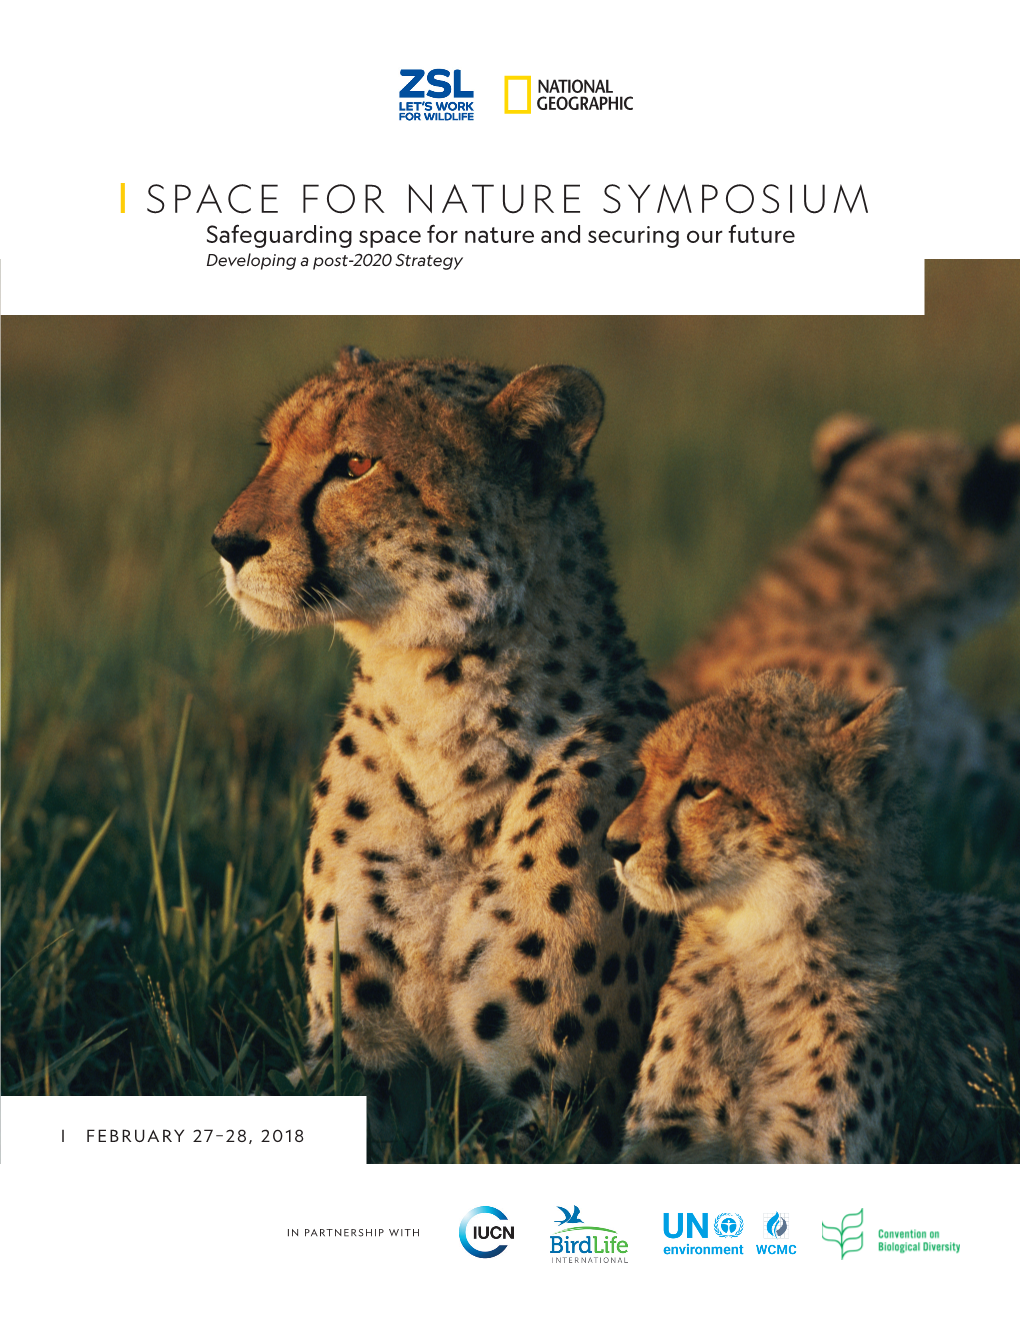 Space for Nature Symposium 27-28 February 2018